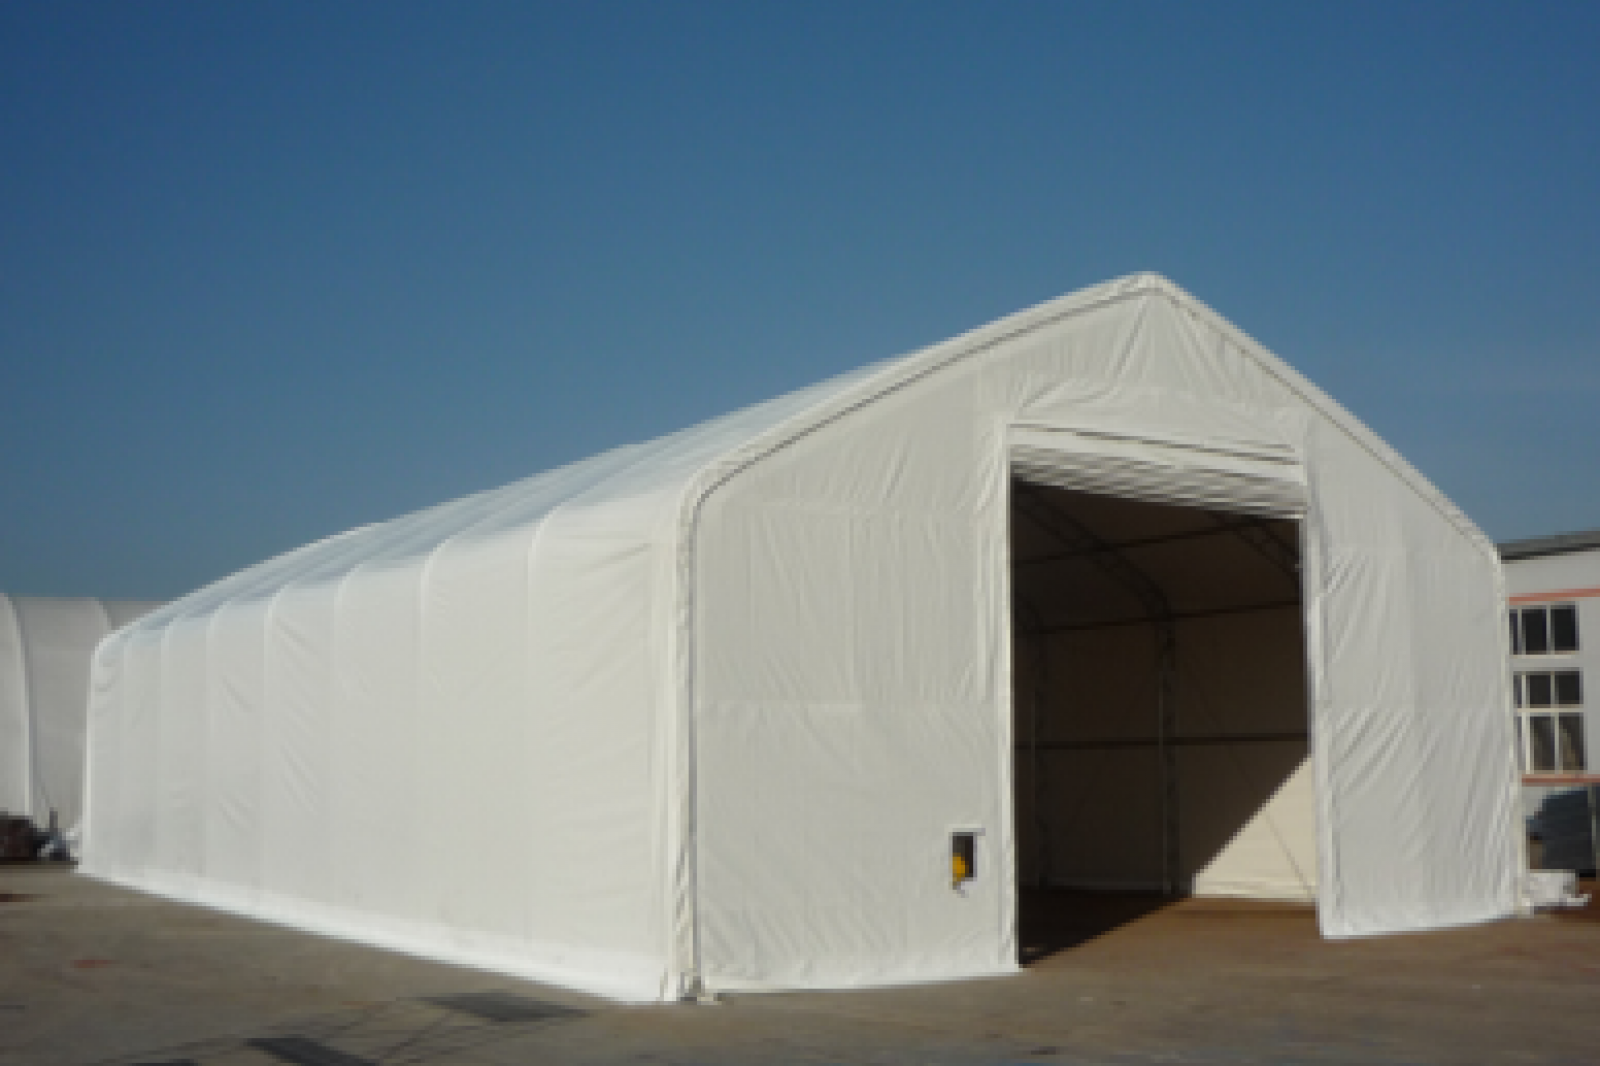 406021P 40ft x 60ft Double Trussed Storage Tent Thumbnail